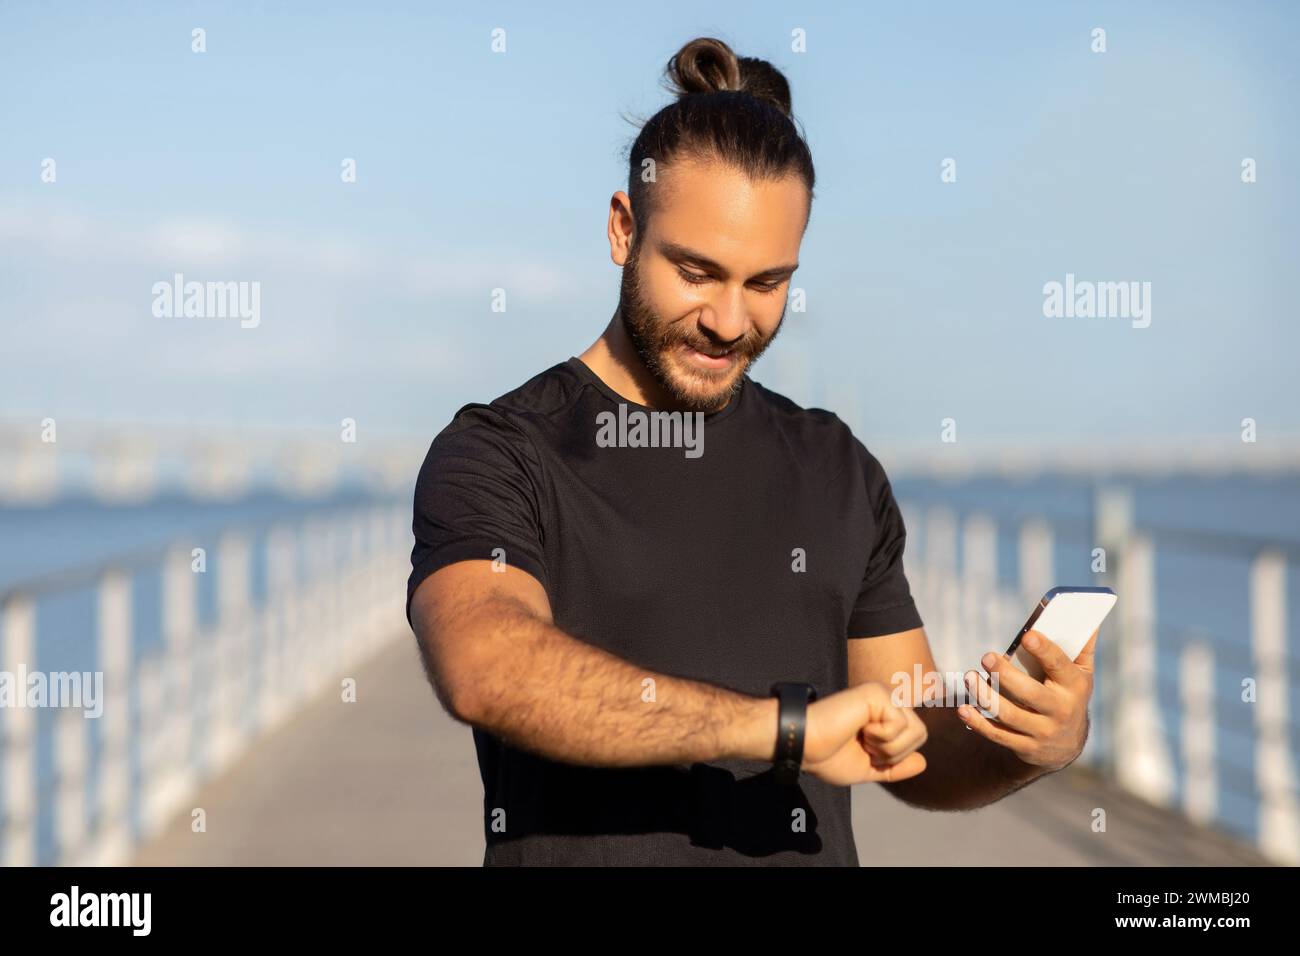 sporty guy checking pulse on fitness tracker holding smartphone outdoor Stock Photo